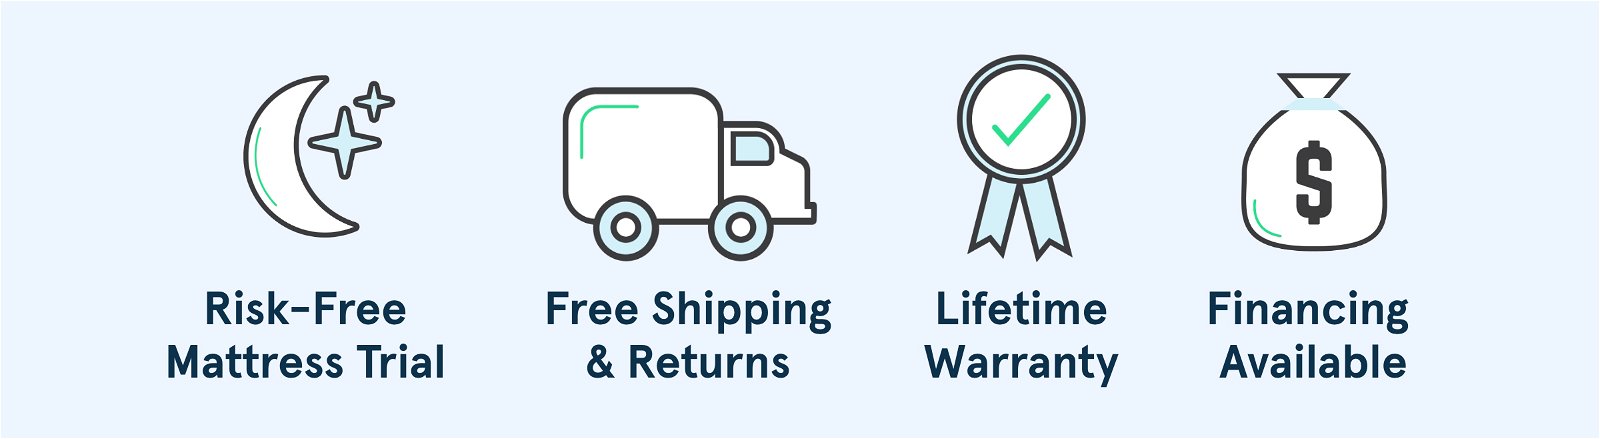 risk-free mattress trial, free shipping and returns, lifetime warranty, financing available